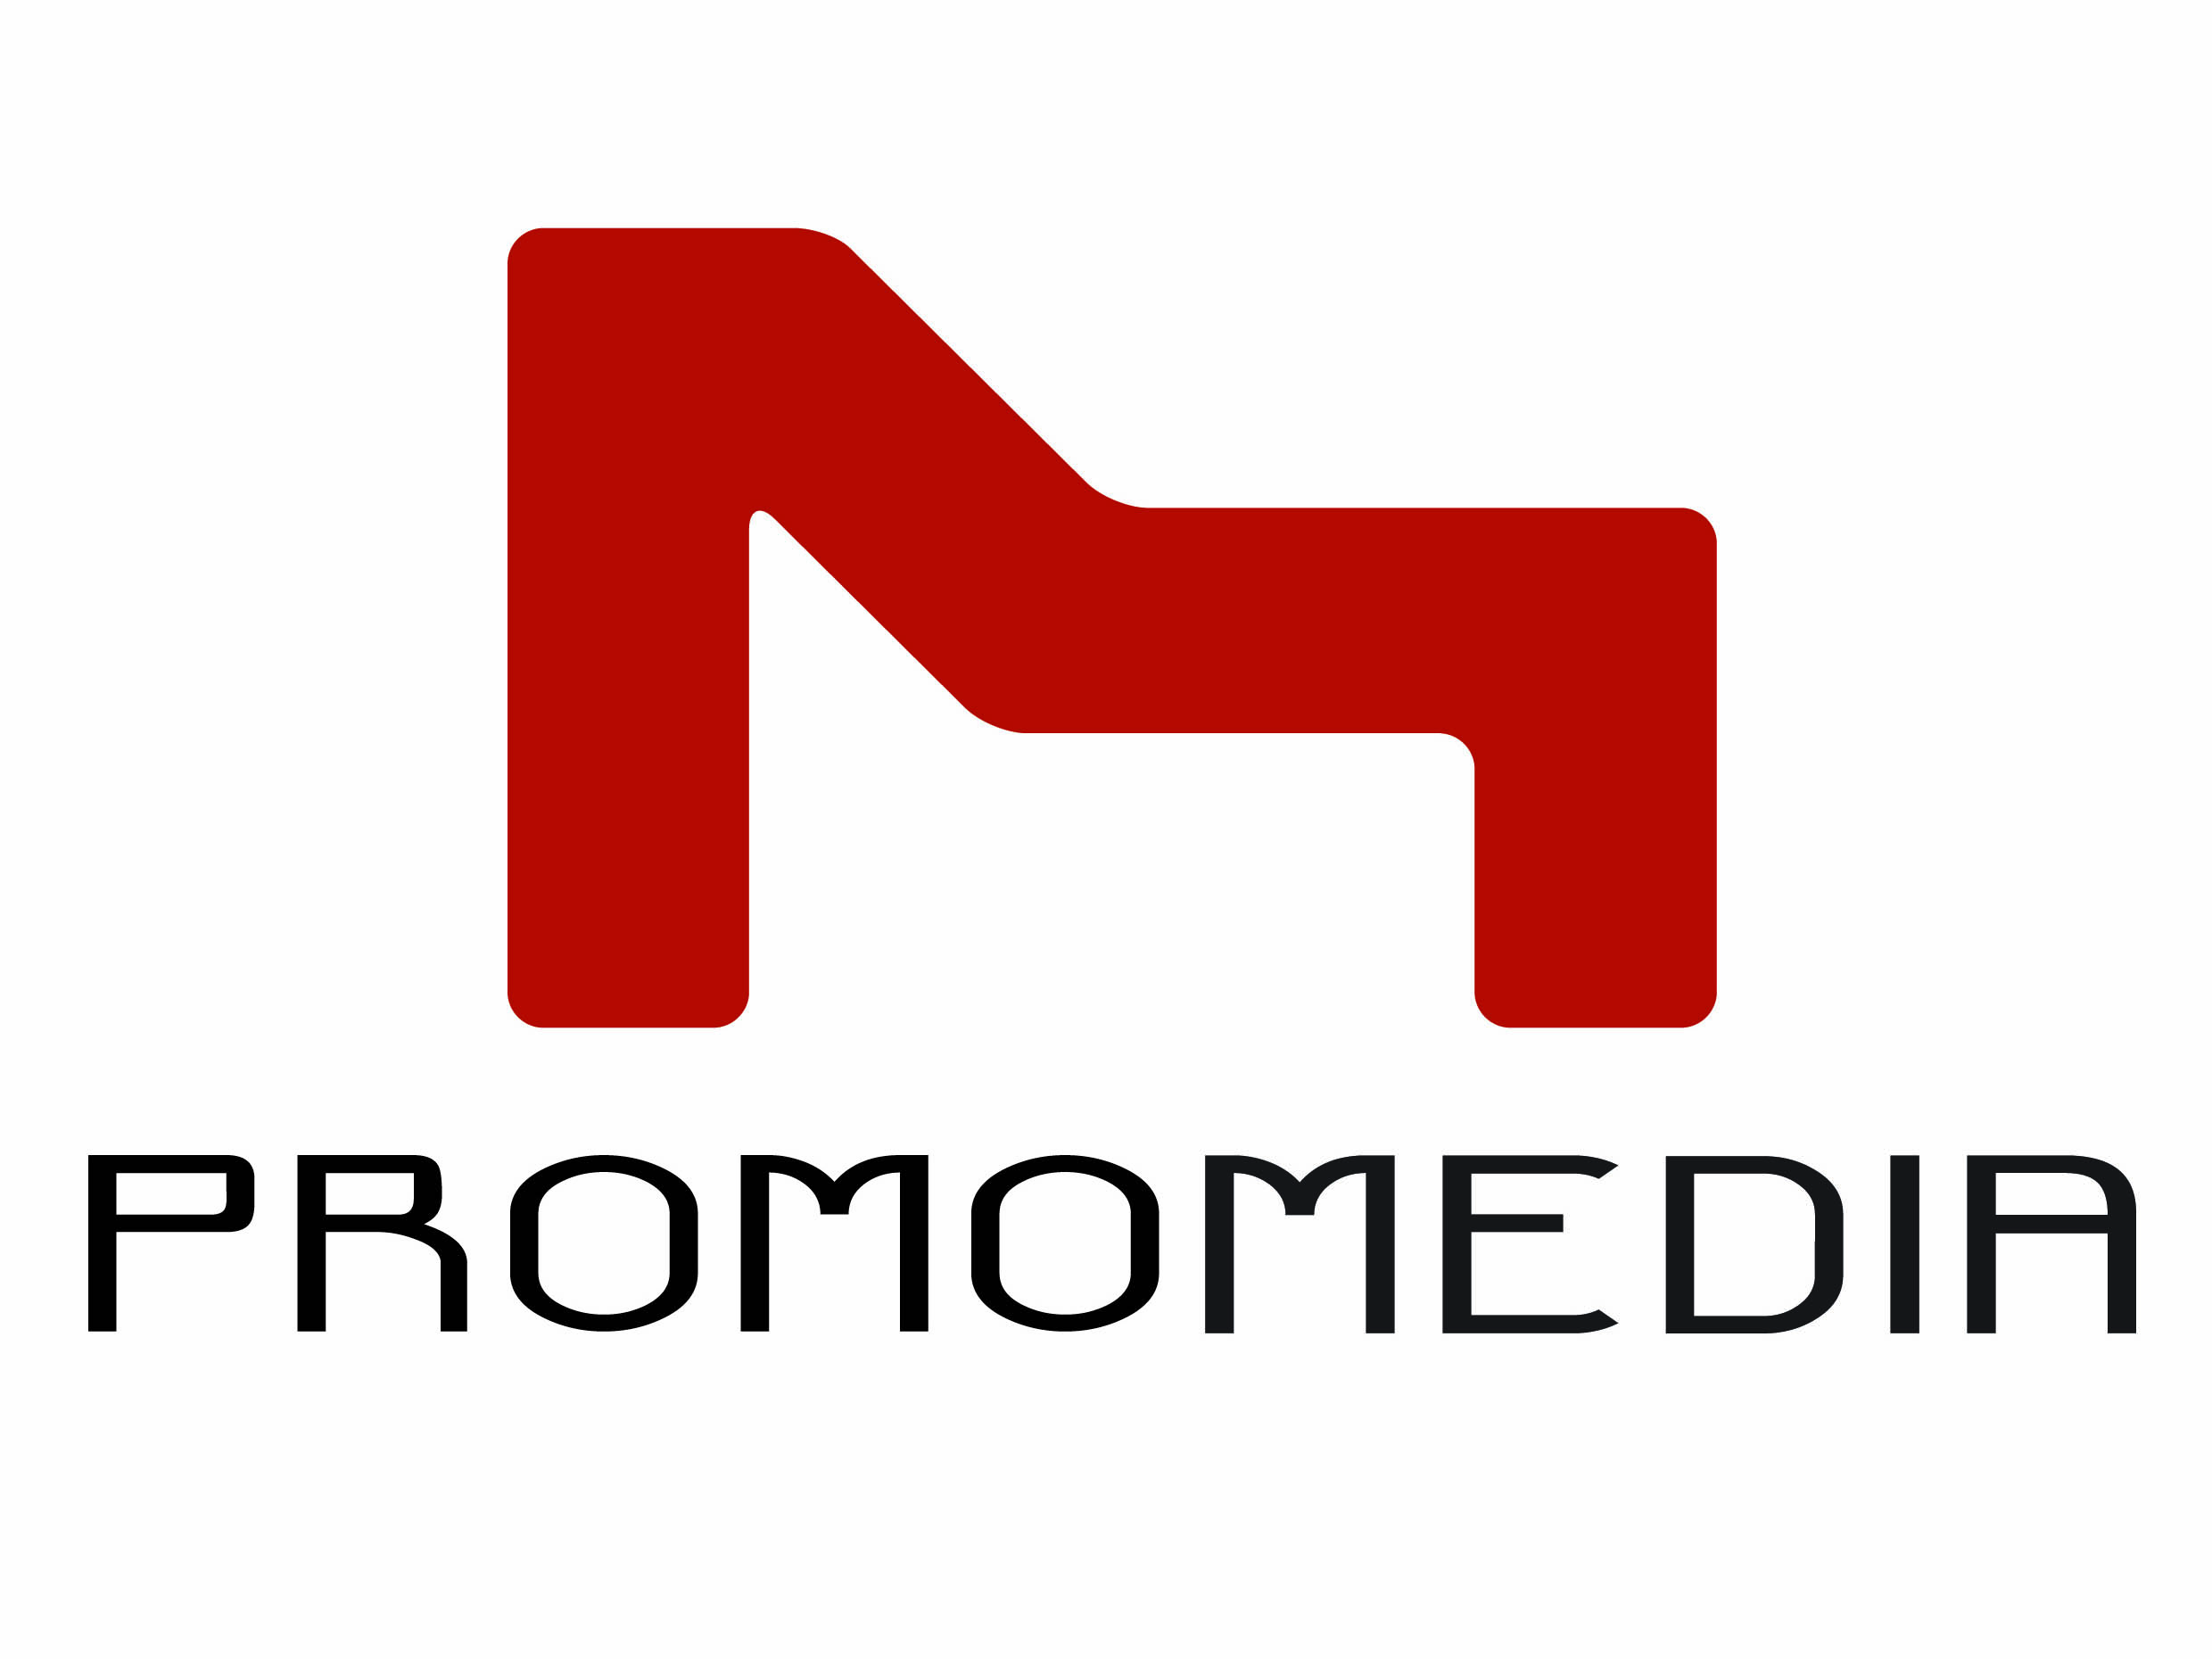 Promomedia introduces Iraq’s first-ever and largest 3D LED billboard